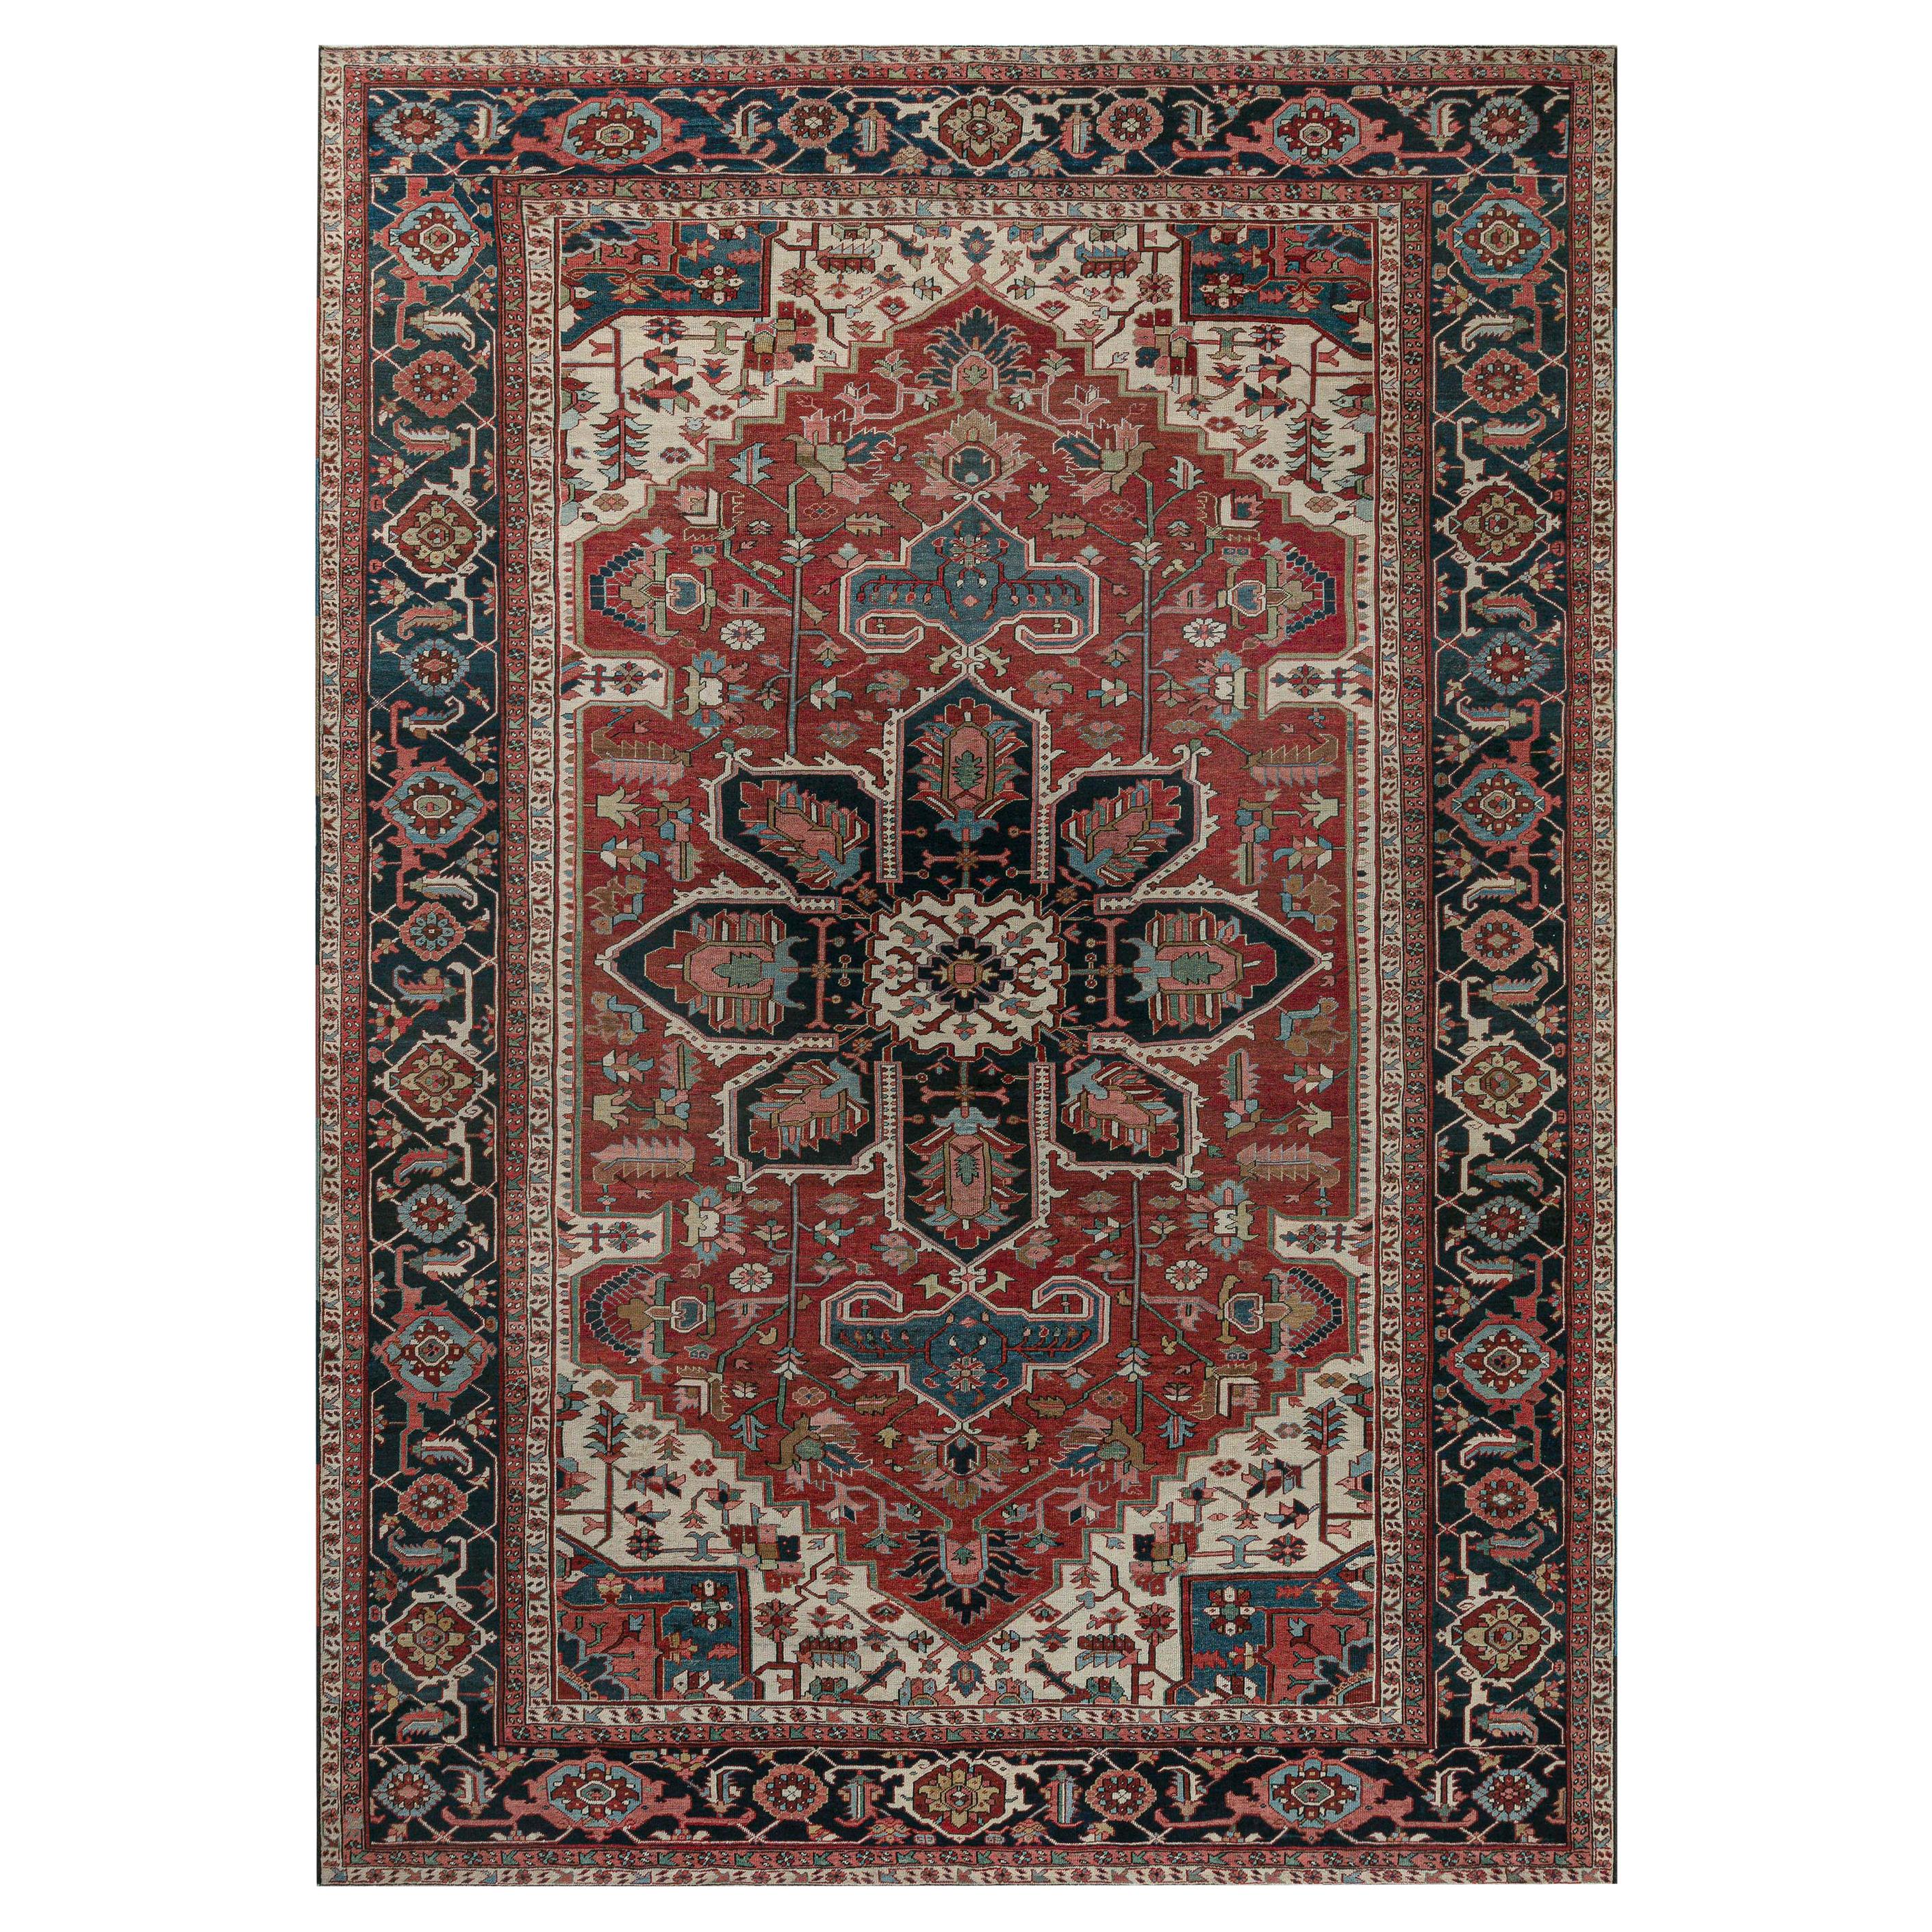 One-of-a-kind Antique Persian Heriz Rug in Beige, Blue, Pink, and Red